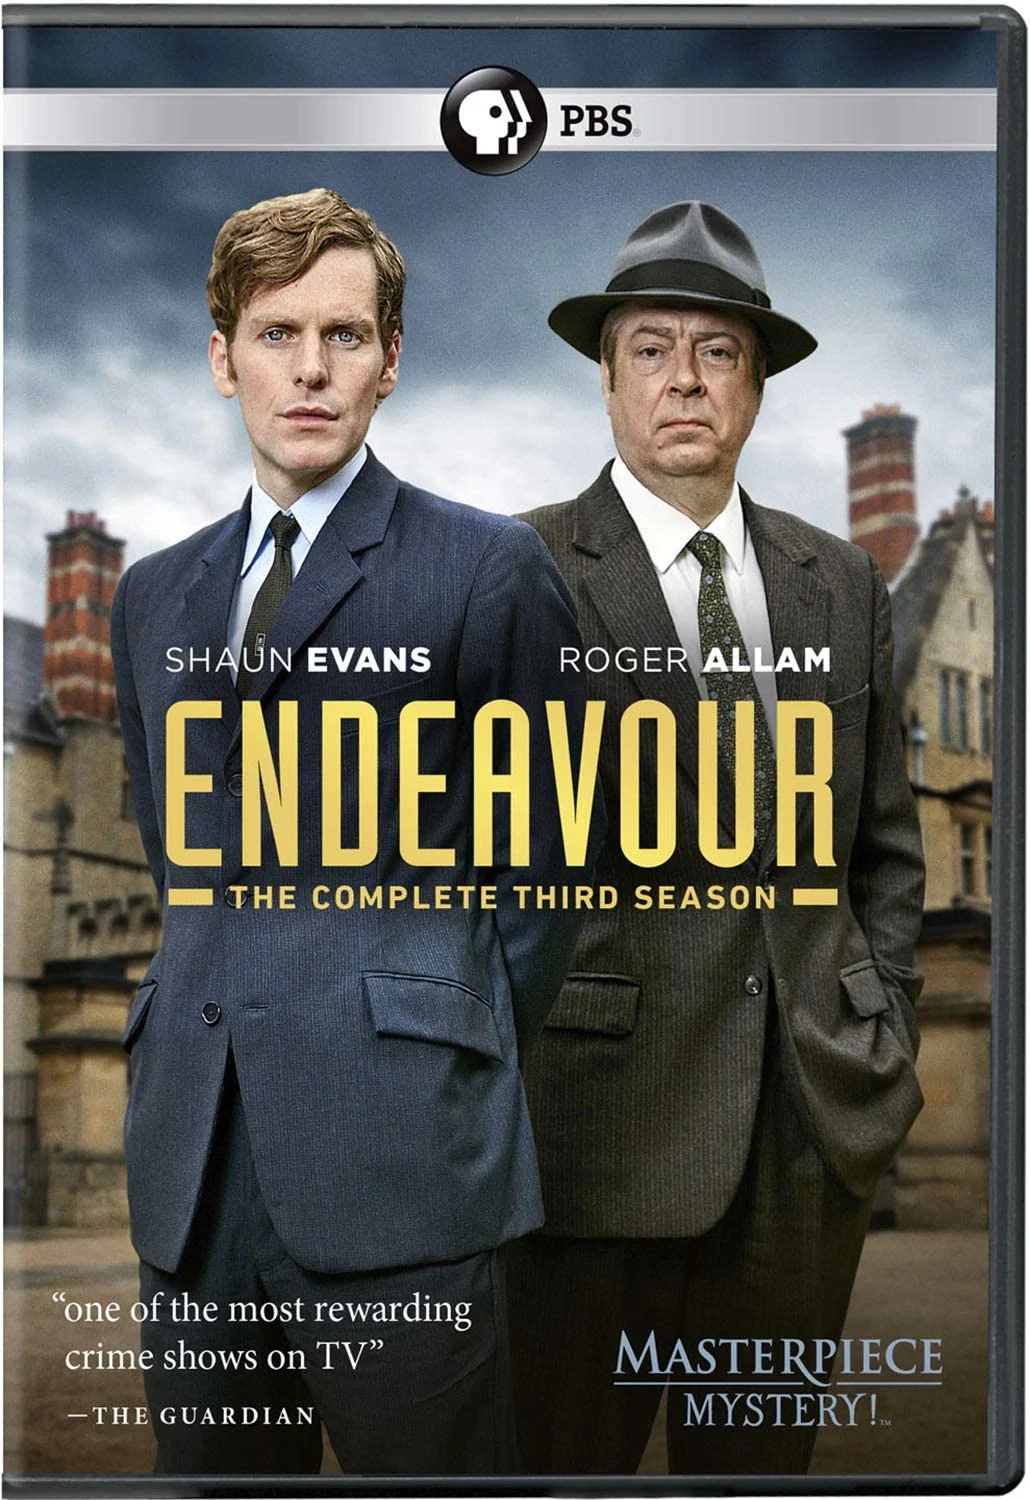 Masterpiece Mystery: Endeavour S3 (DVD)